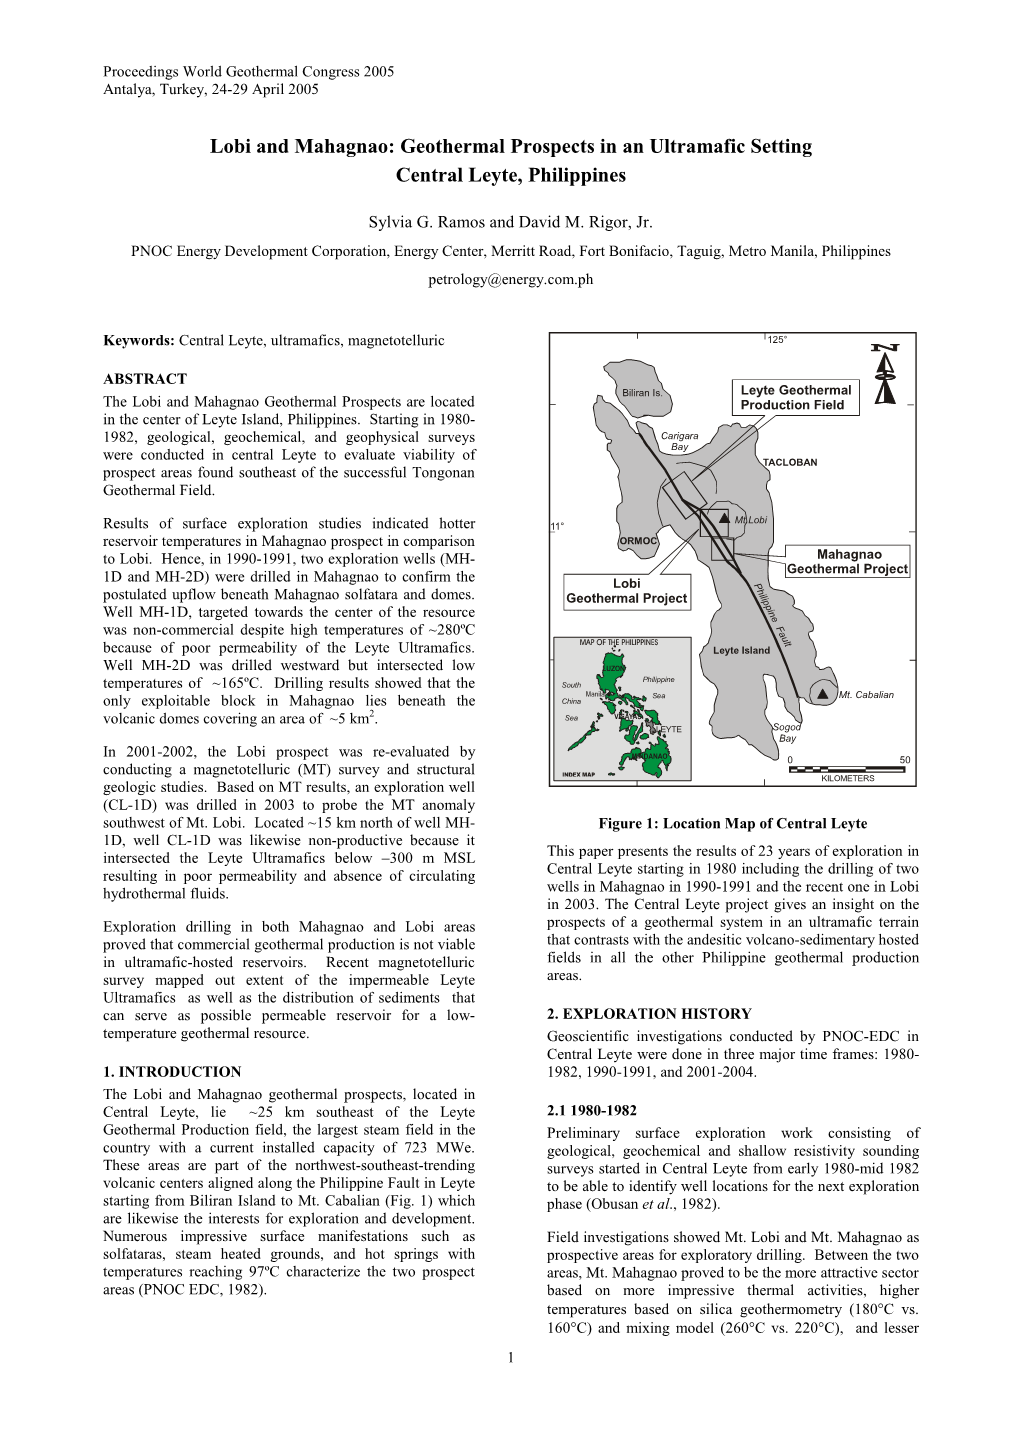 Lobi and Mahagnao: Geothermal Prospects in an Ultramafic Setting Central Leyte, Philippines